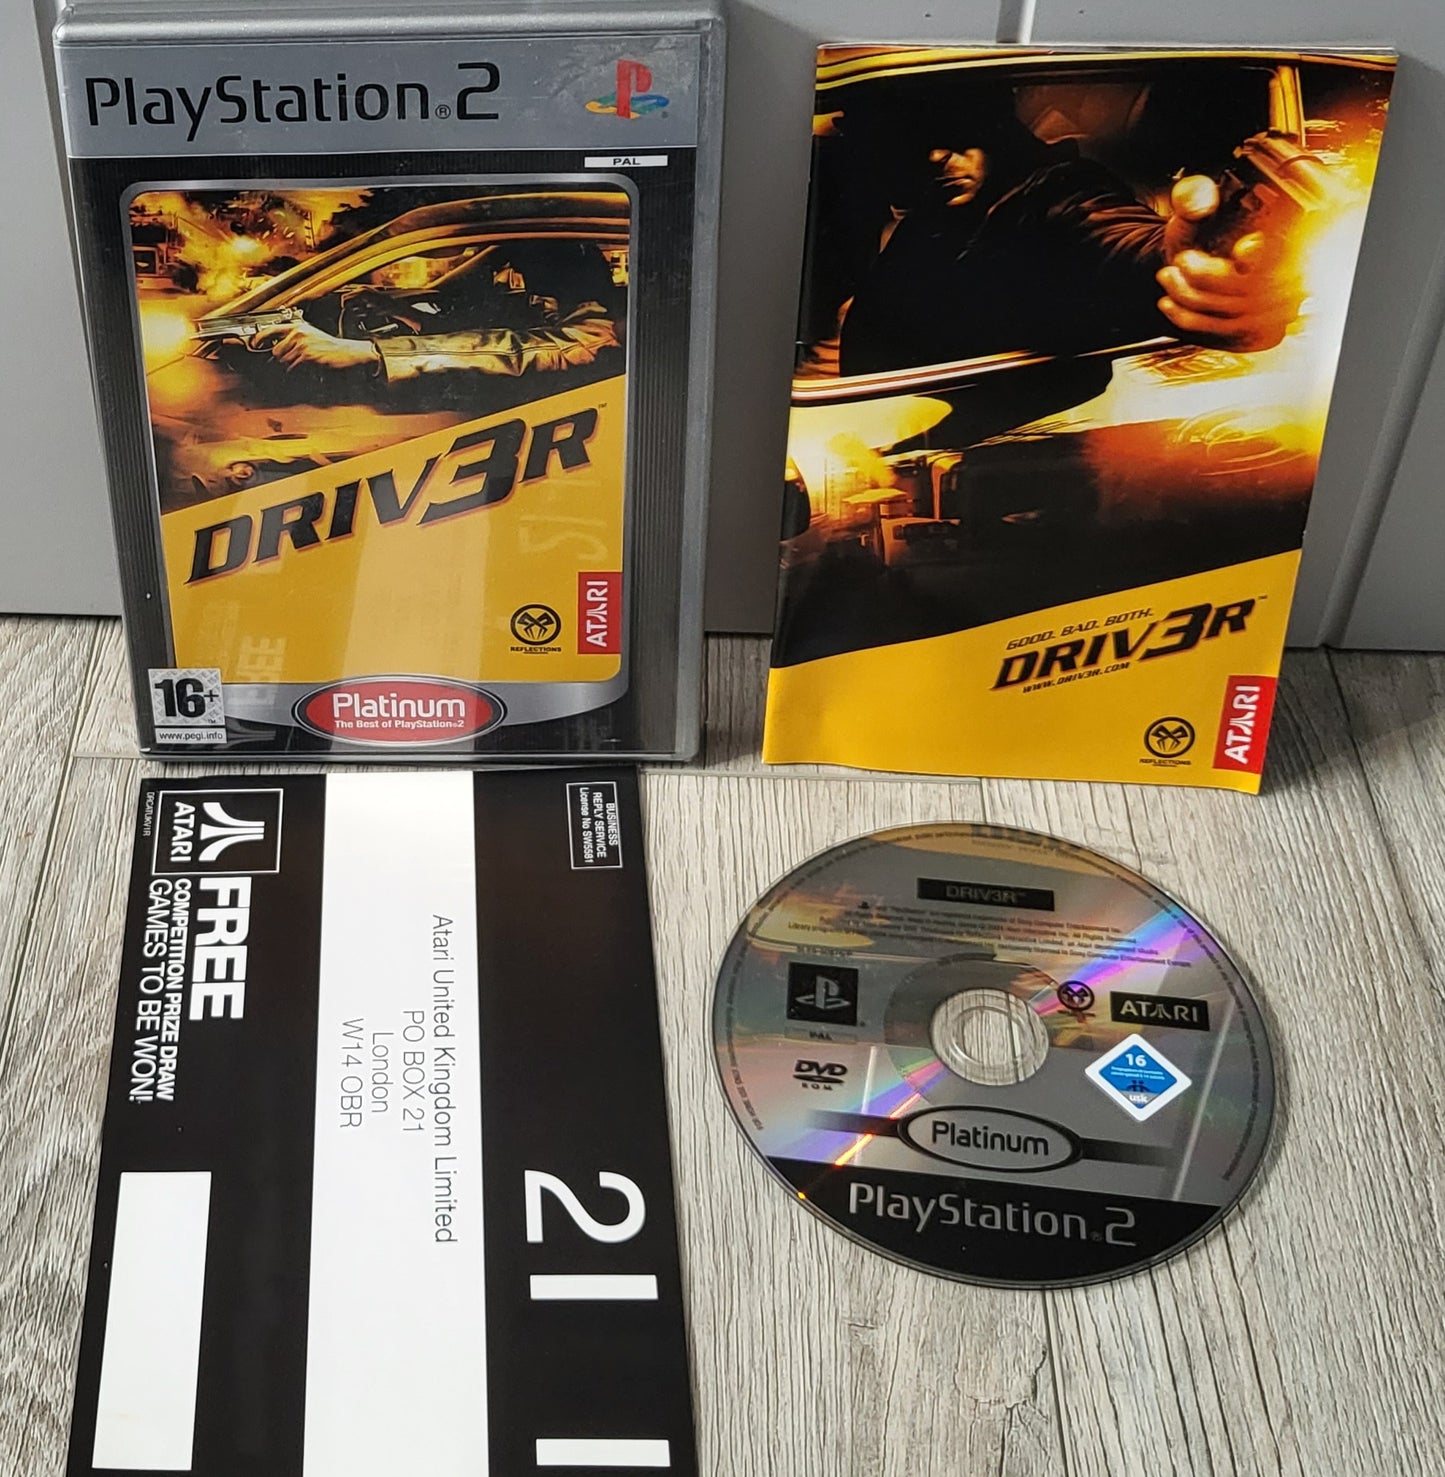 Driv3r Sony Playstation 2 (PS2) Game